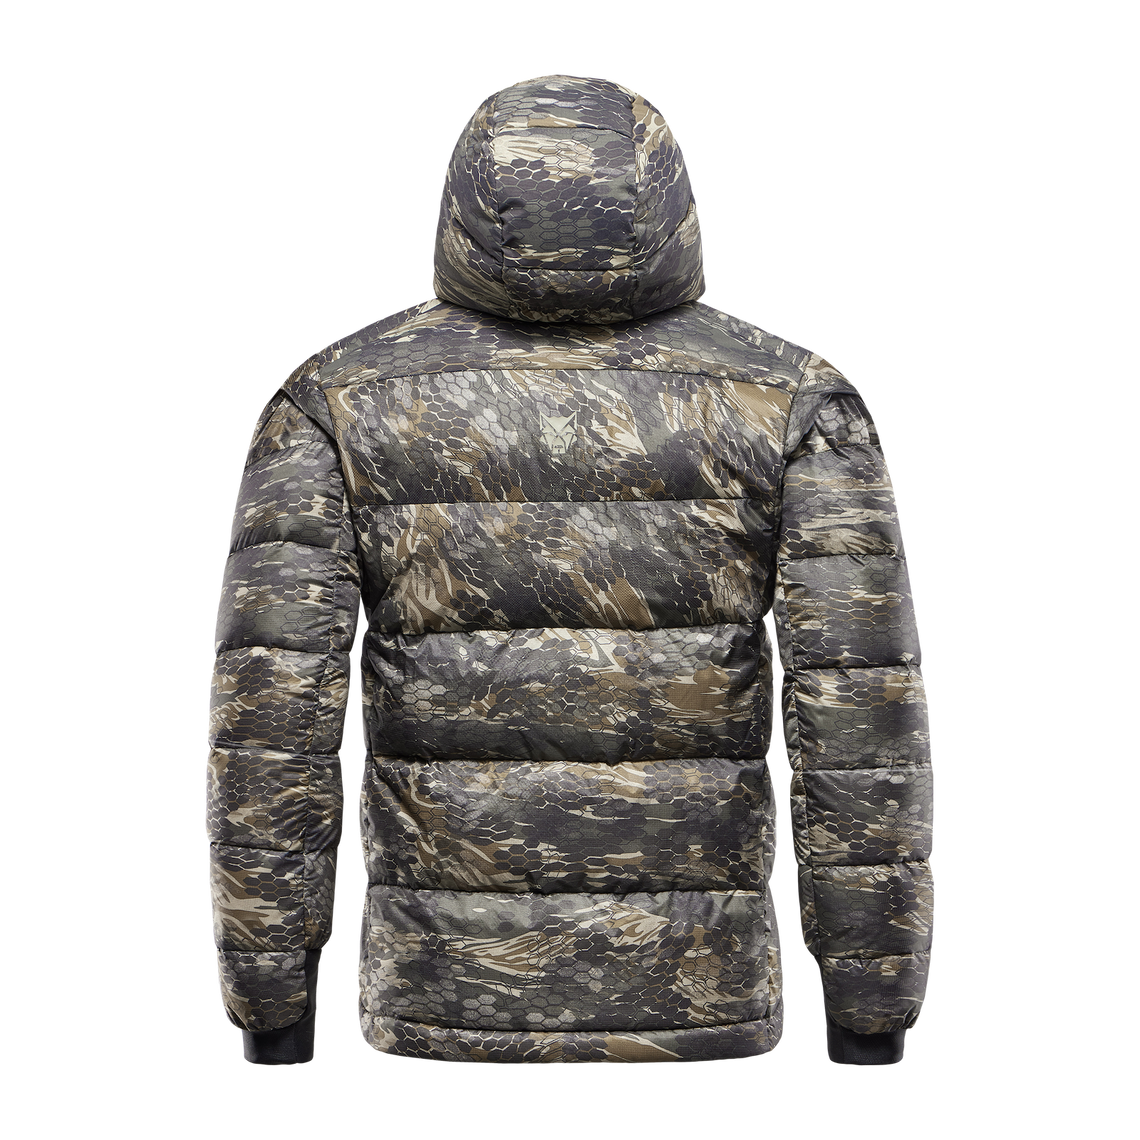 The latest collection of gray puffer & down jackets for men